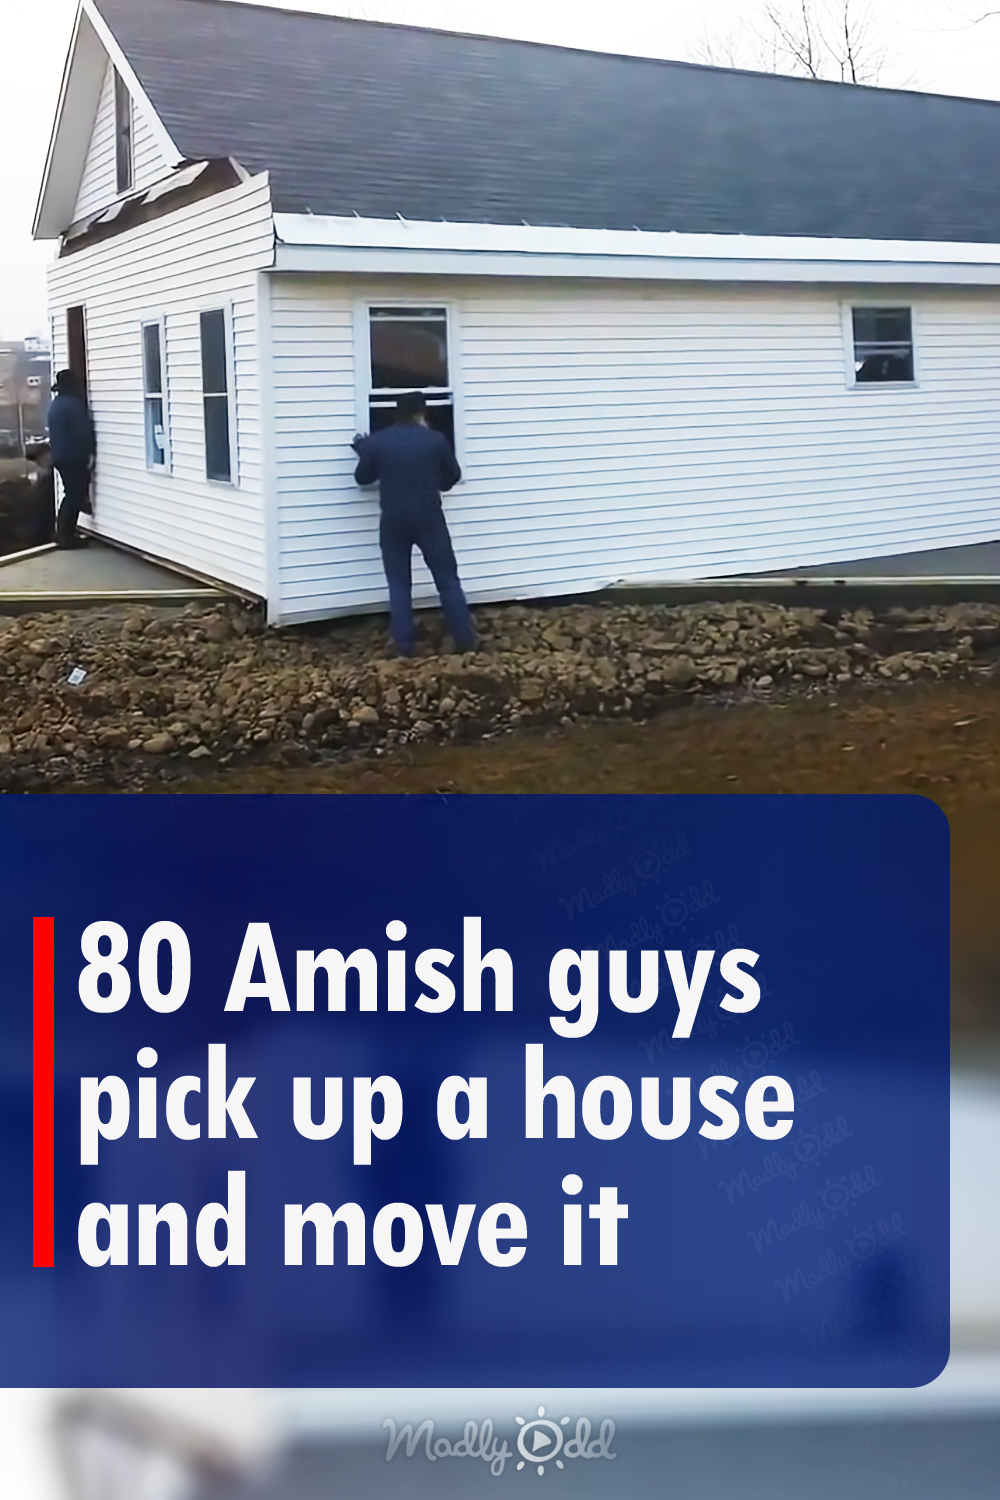 80 Amish guys pick up a house and move it